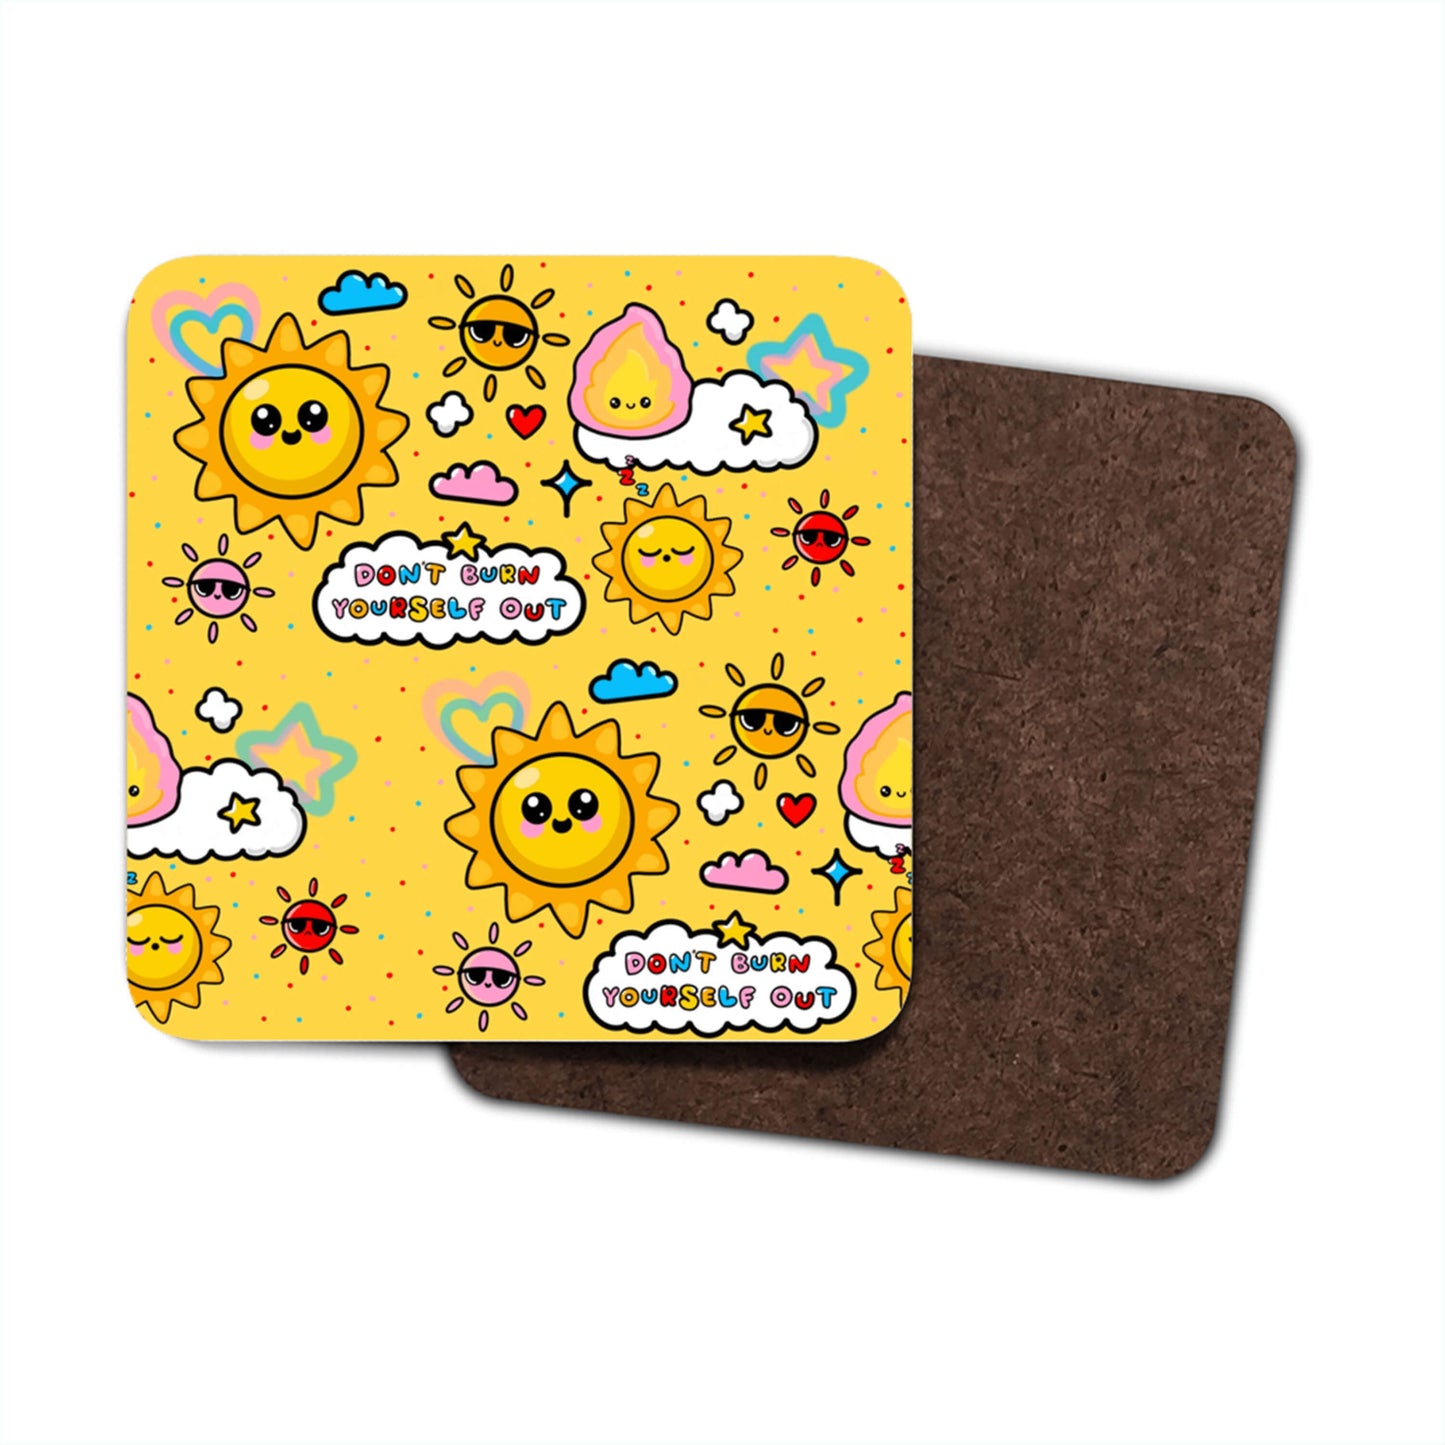 The Dont burn yourself out coaster on a white background. A yellow wooden coaster with cute sun, cloud, star and heart illustrations. 'Don't burn yourself out' is written in coloured letters in white clouds around the coaster. Inspired by the self care movement.